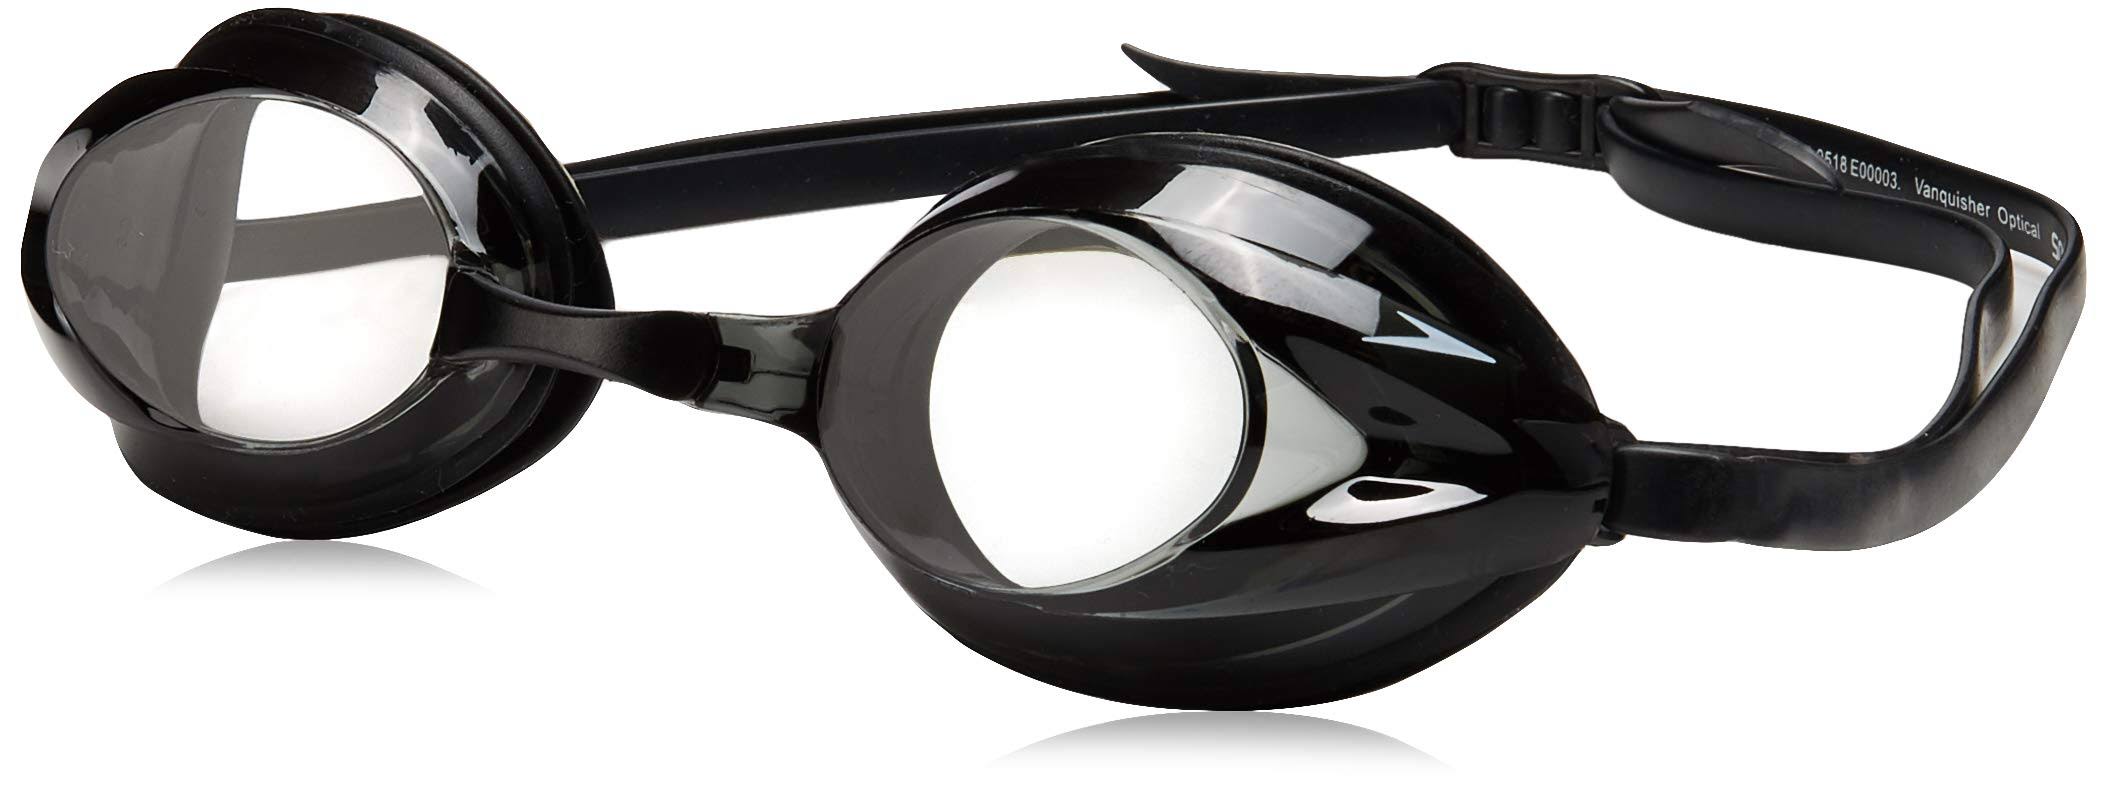 Speedo Vanquisher Optical Prescription Goggles Clear at Ly Sports